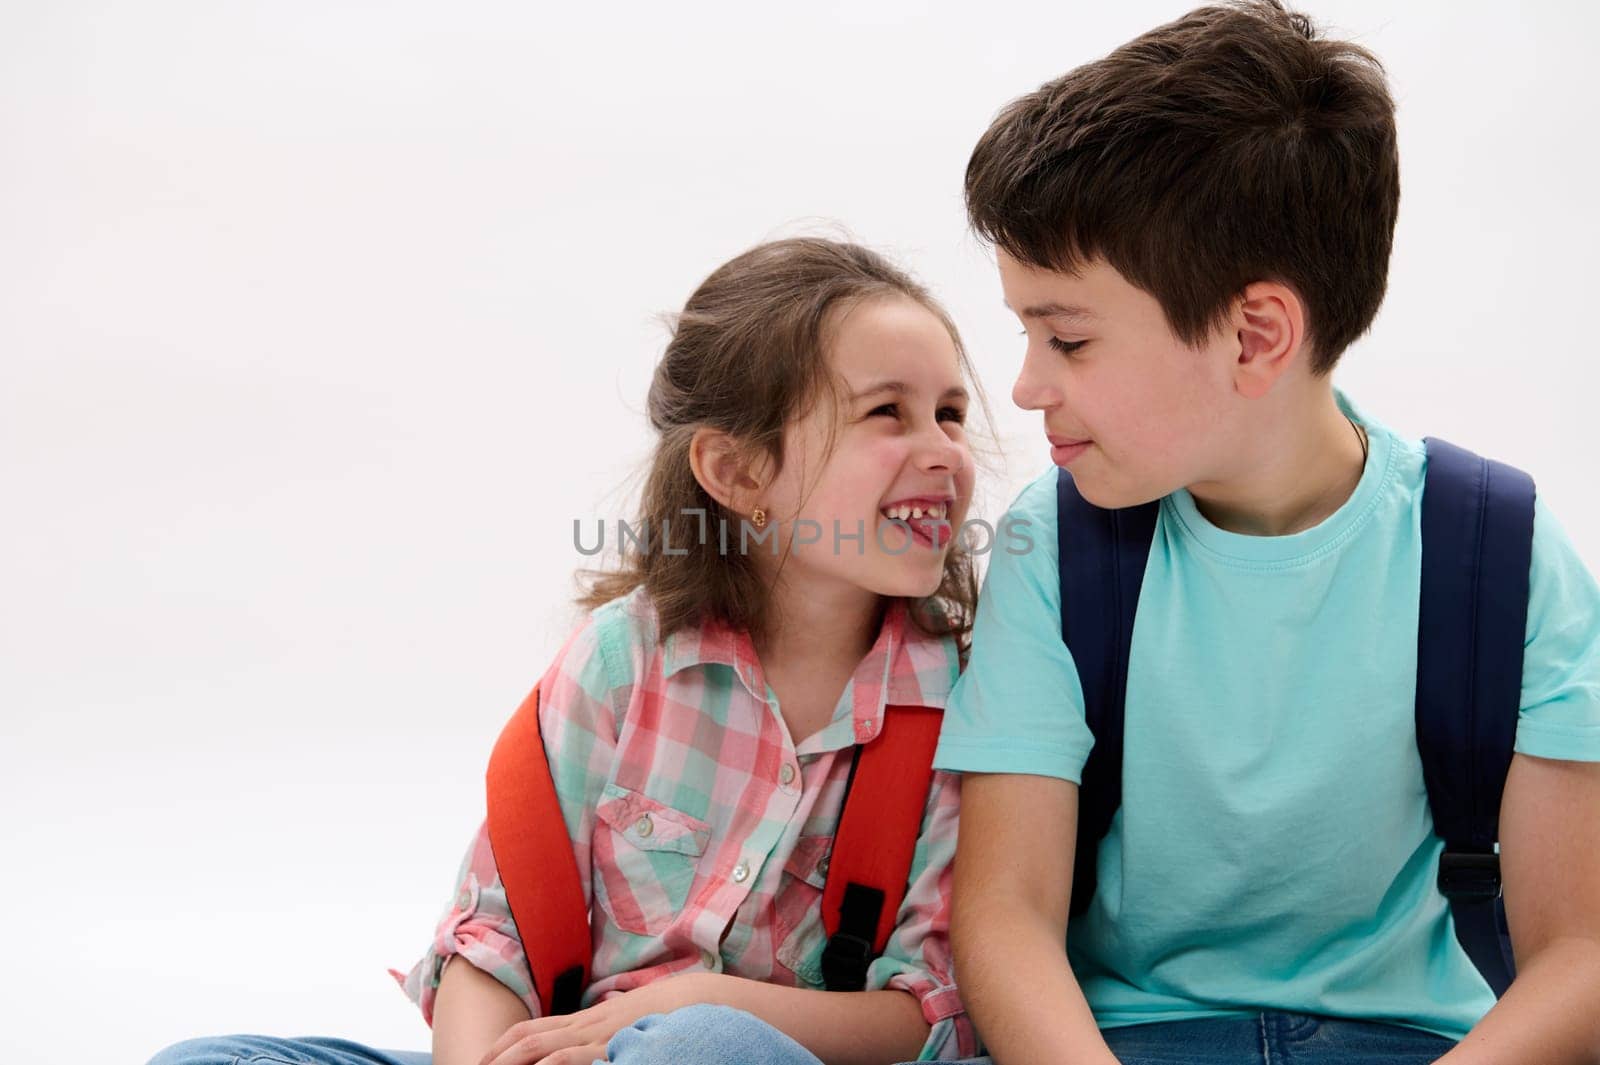 Mischievous little girl, shows tongue and makes faces, smiles to her older brother, isolated over white background. Cheerful smart school Kids with backpacks having fun together. Family relationships